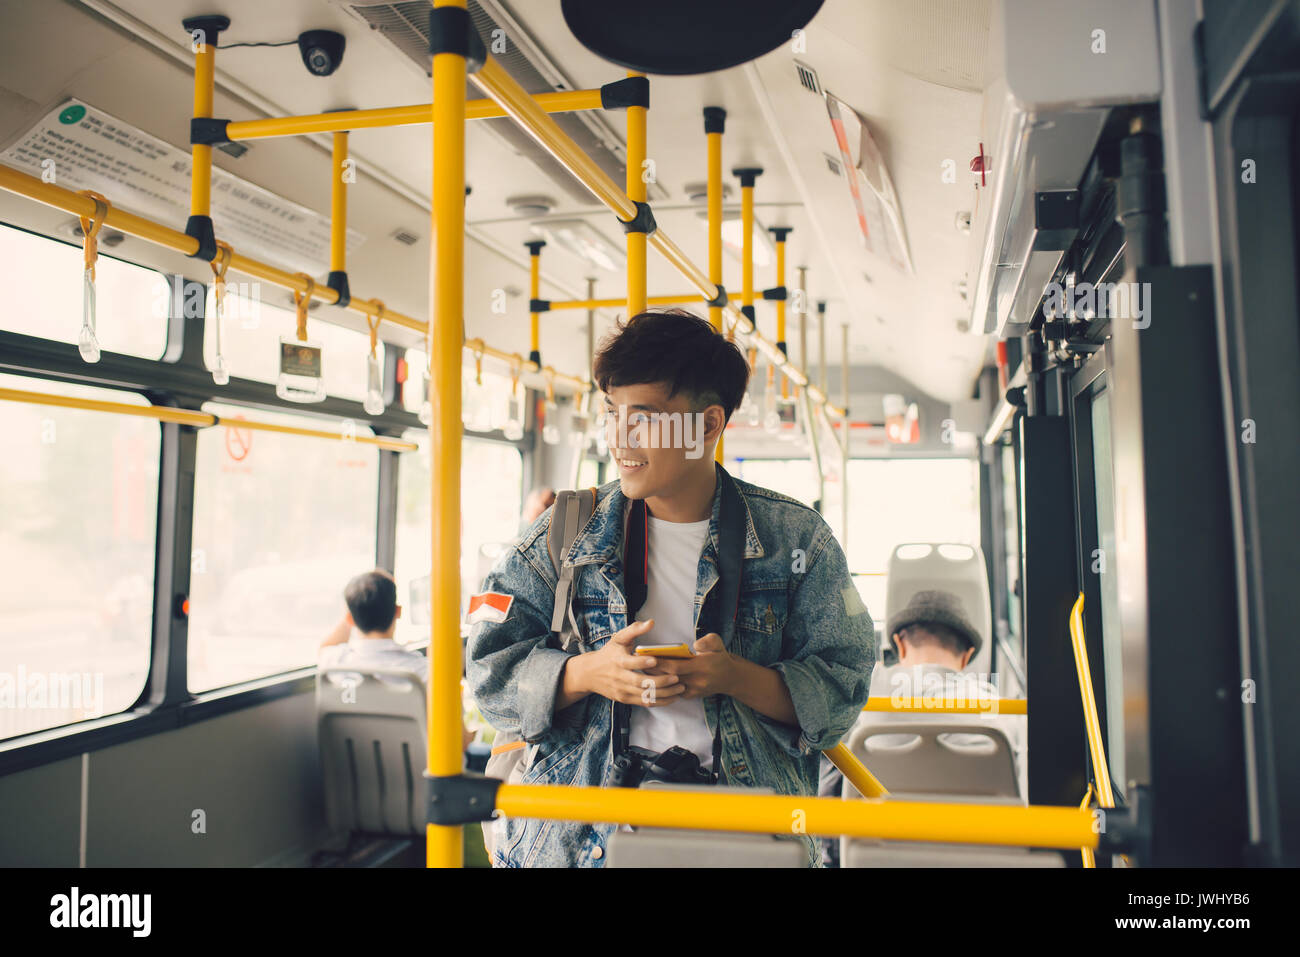 People in the bus. Asian man using smartphone in public transport Stock Photo